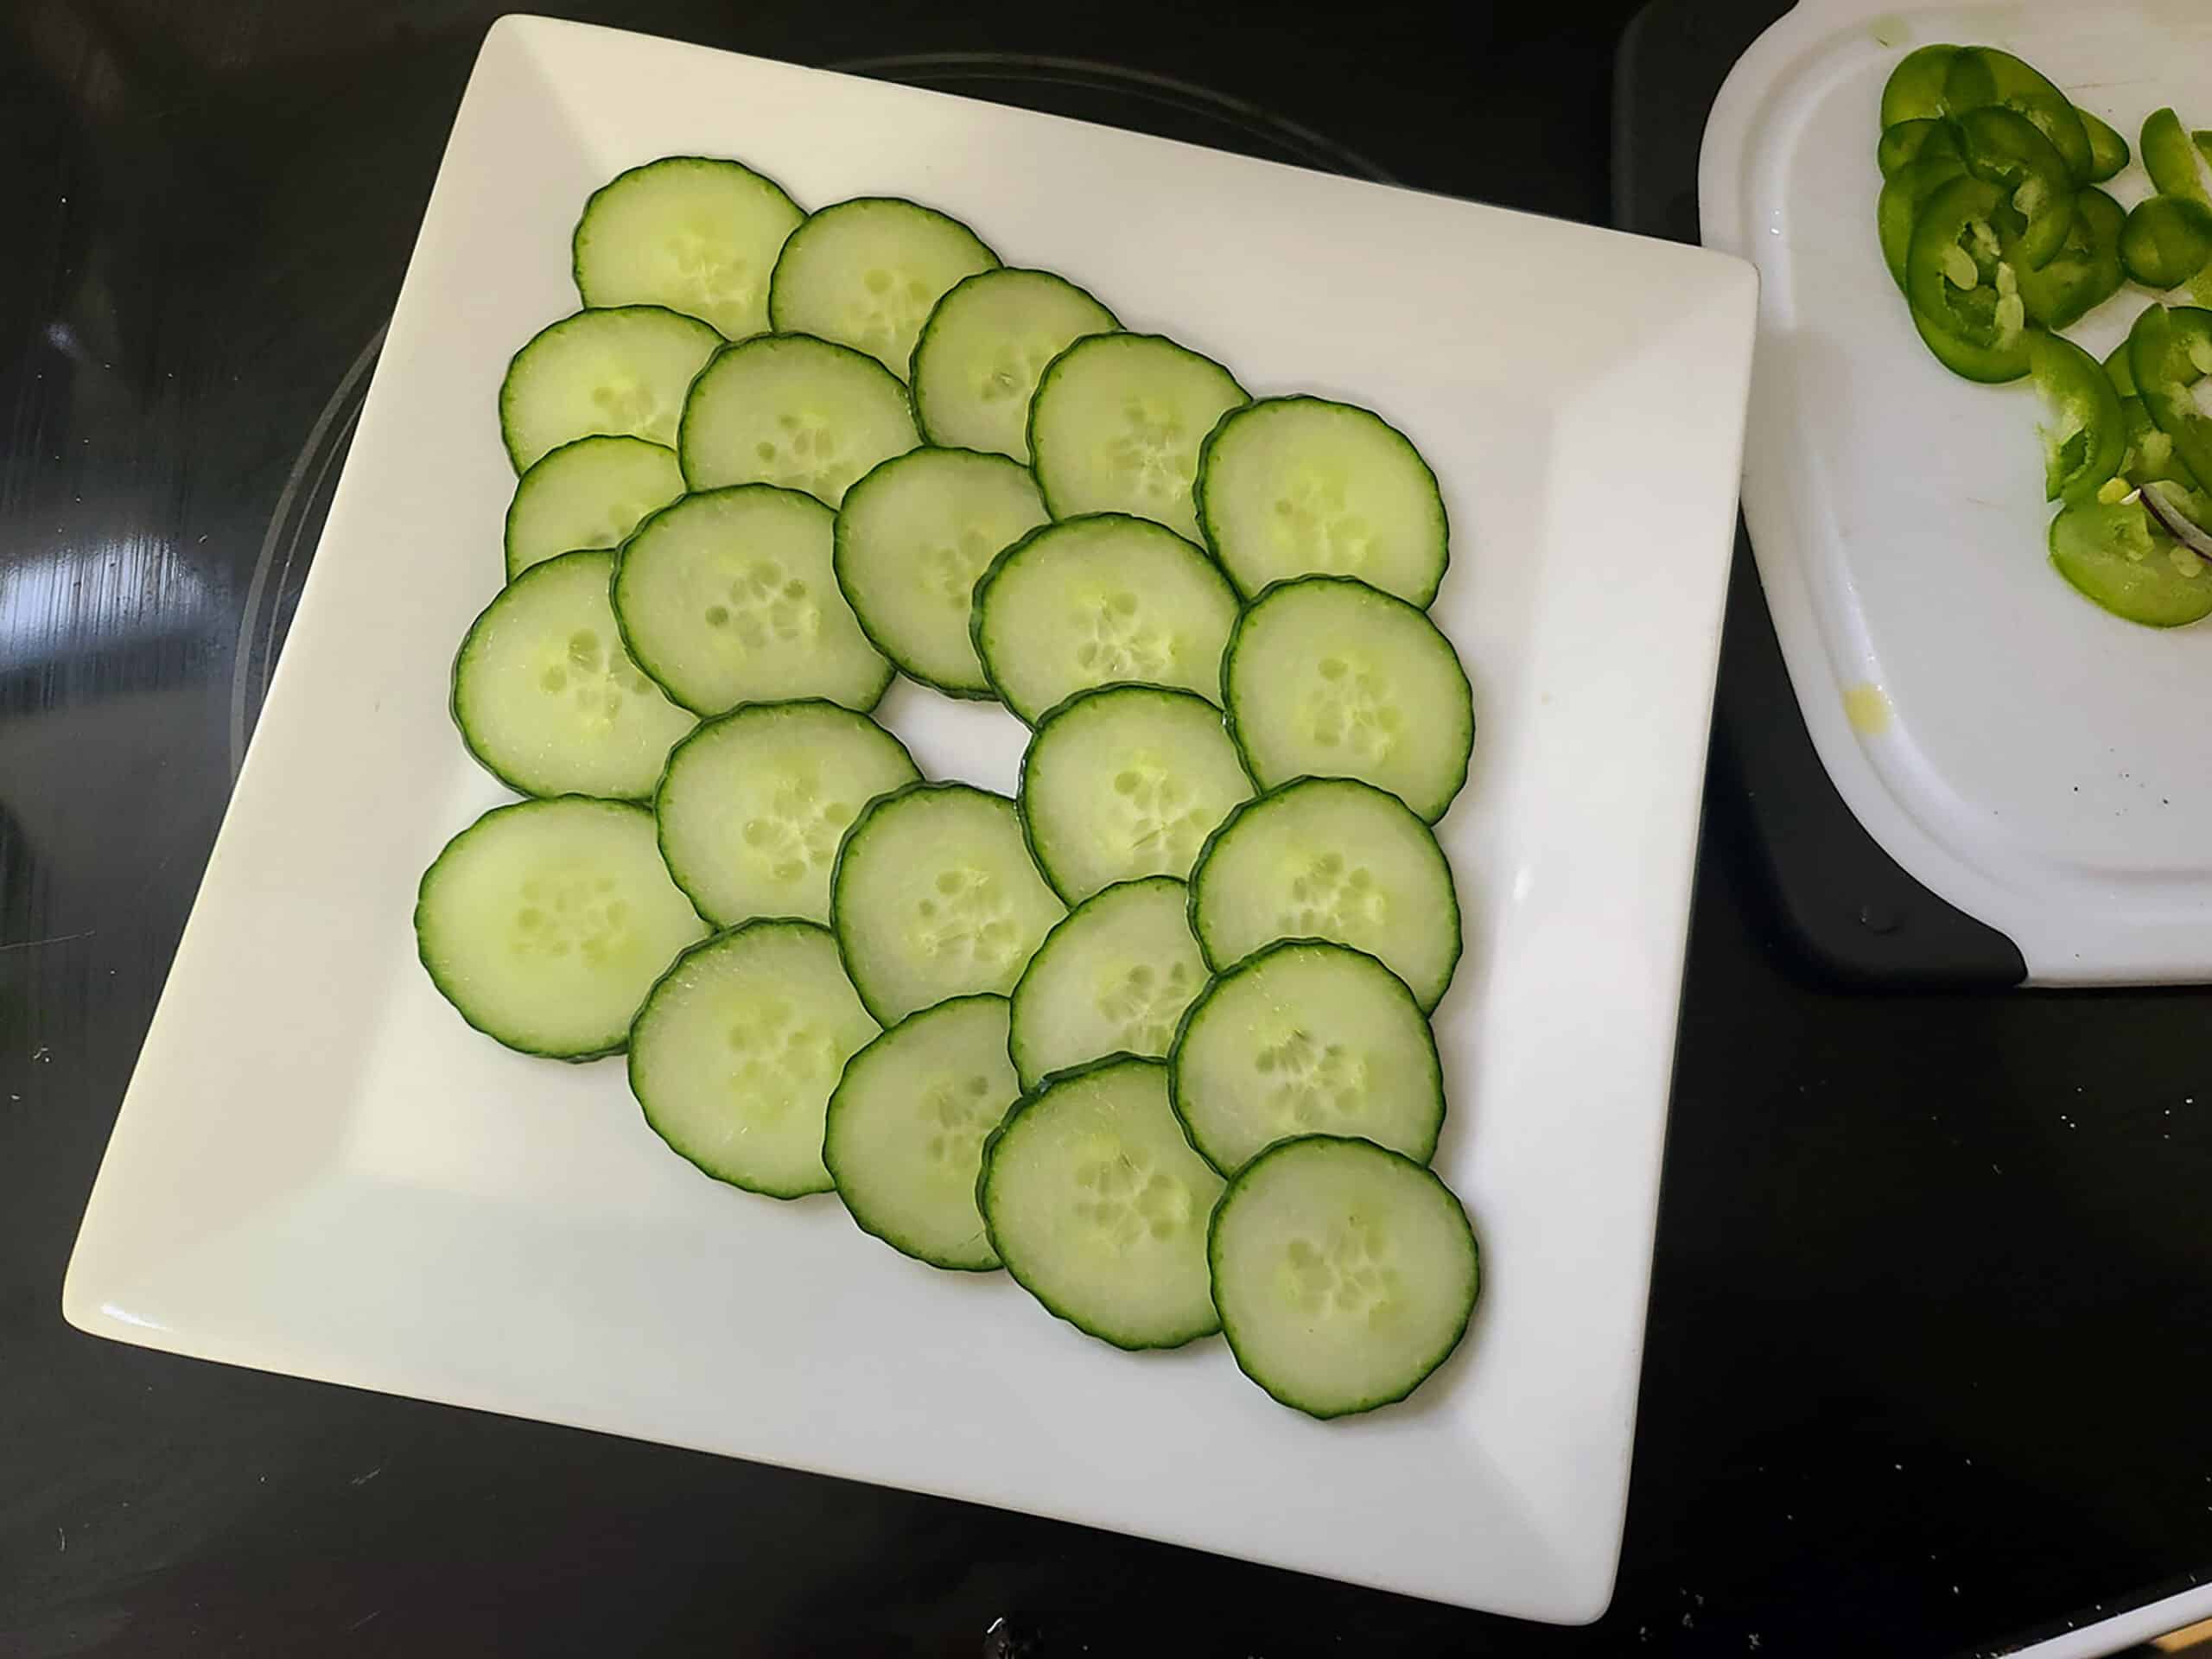 Thin cucumber slices are arranged in a diamond pattern on a white plate.